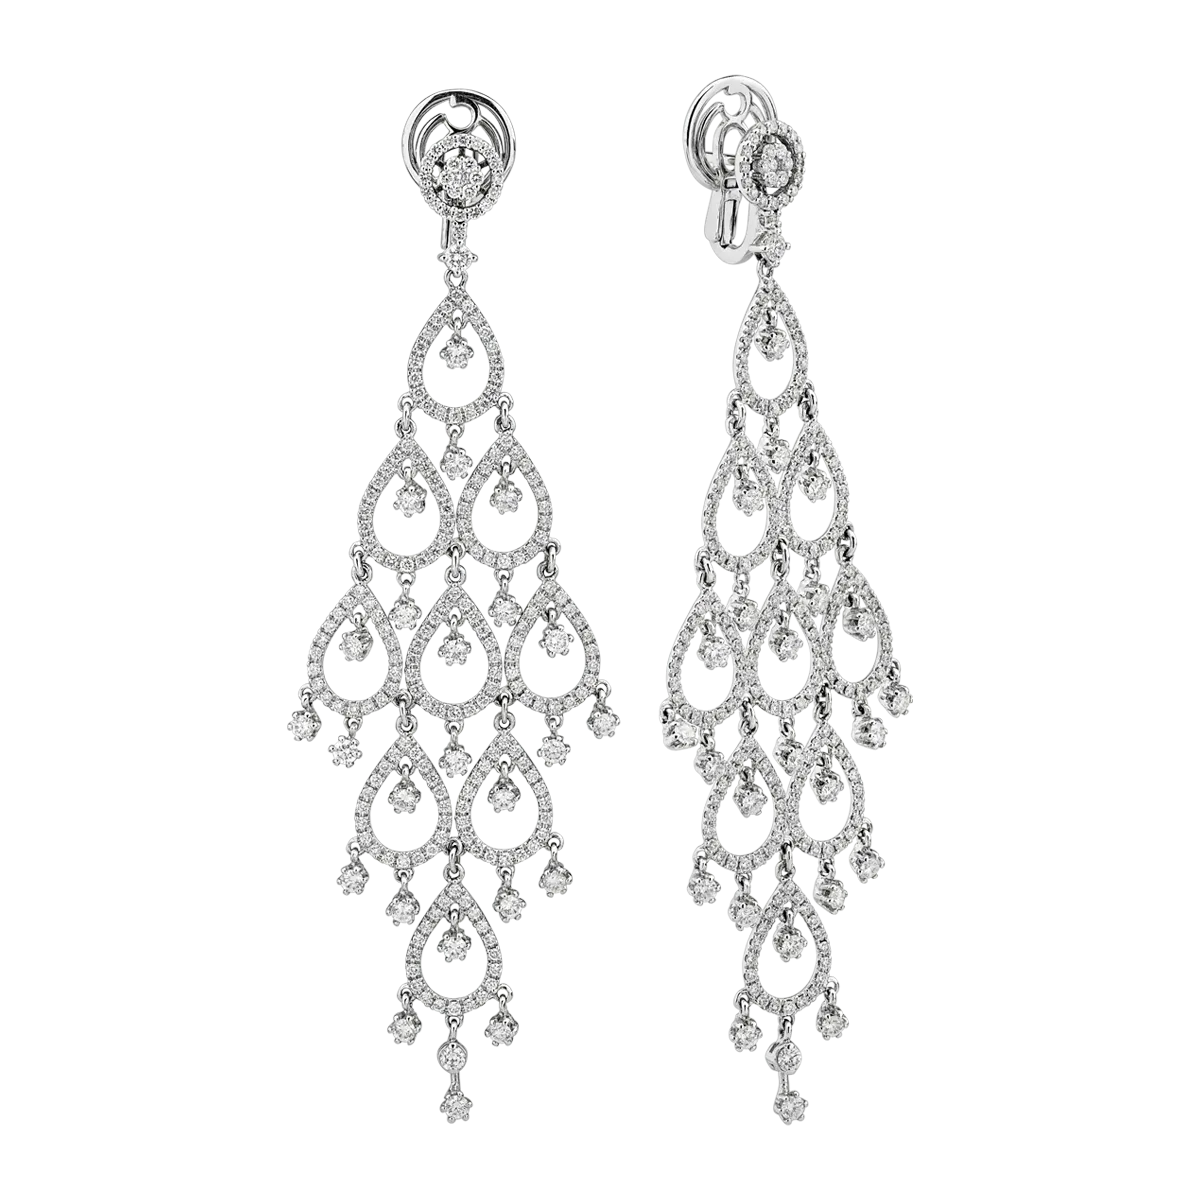 18K white gold earrings with 5.14ct diamonds